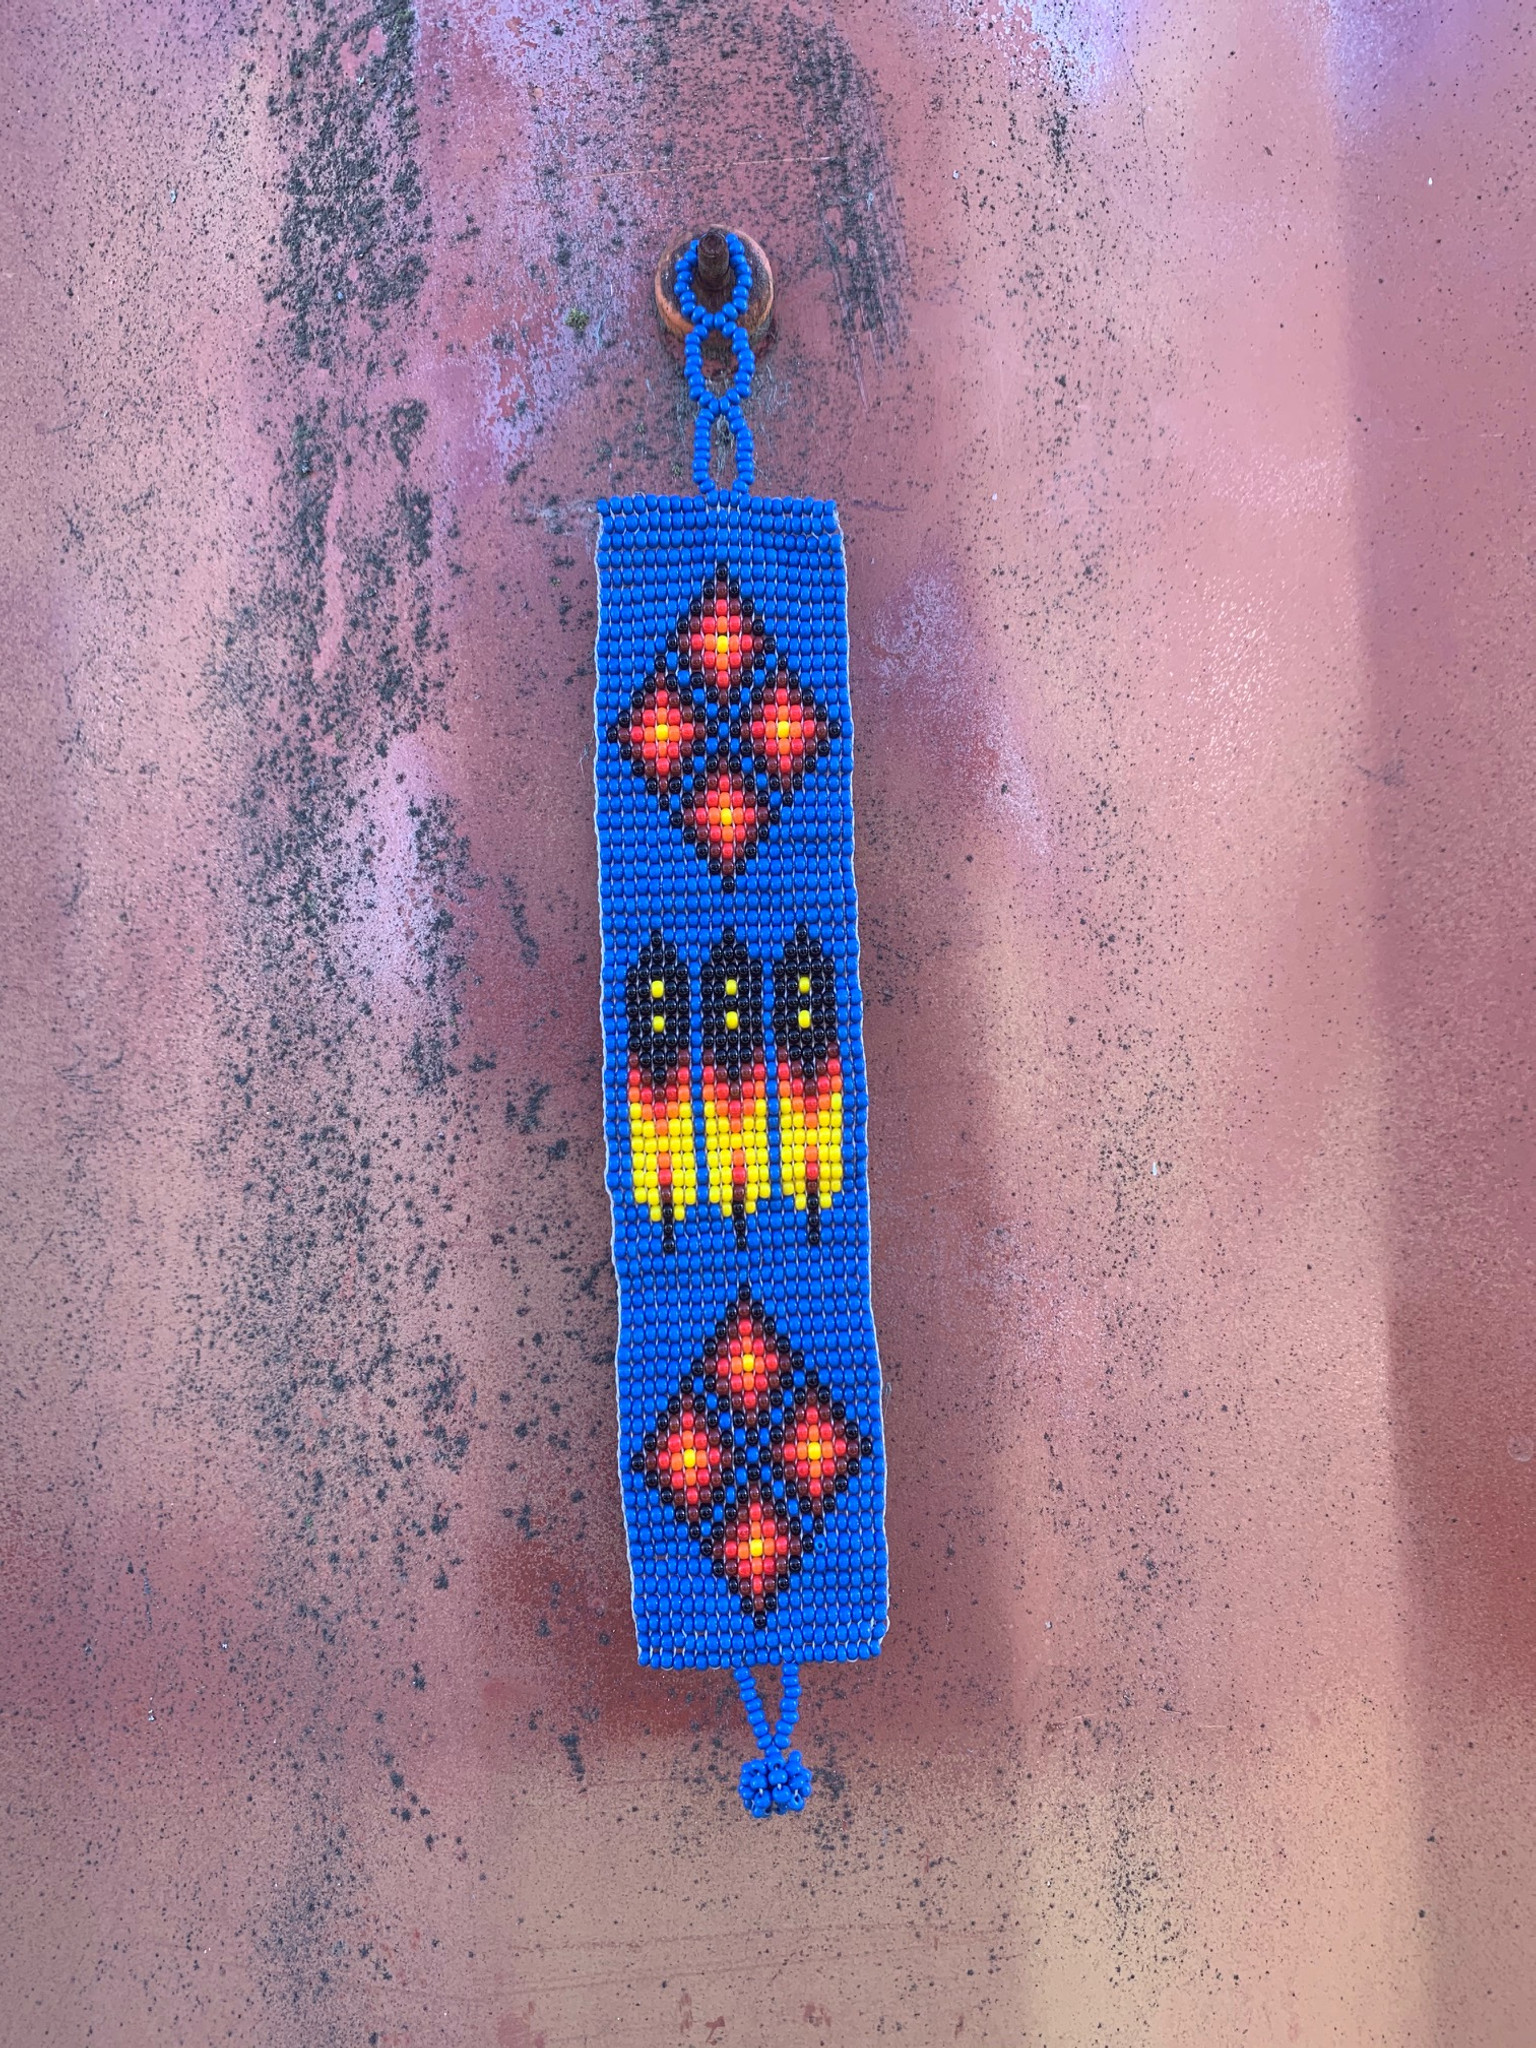 Navajo Beadwork | Native American Jewelry | Indian Vintage Necklace, Ear  Rings, Bracelets | Navajo Indian Rugs and Sandpaintings - Arts and Crafts